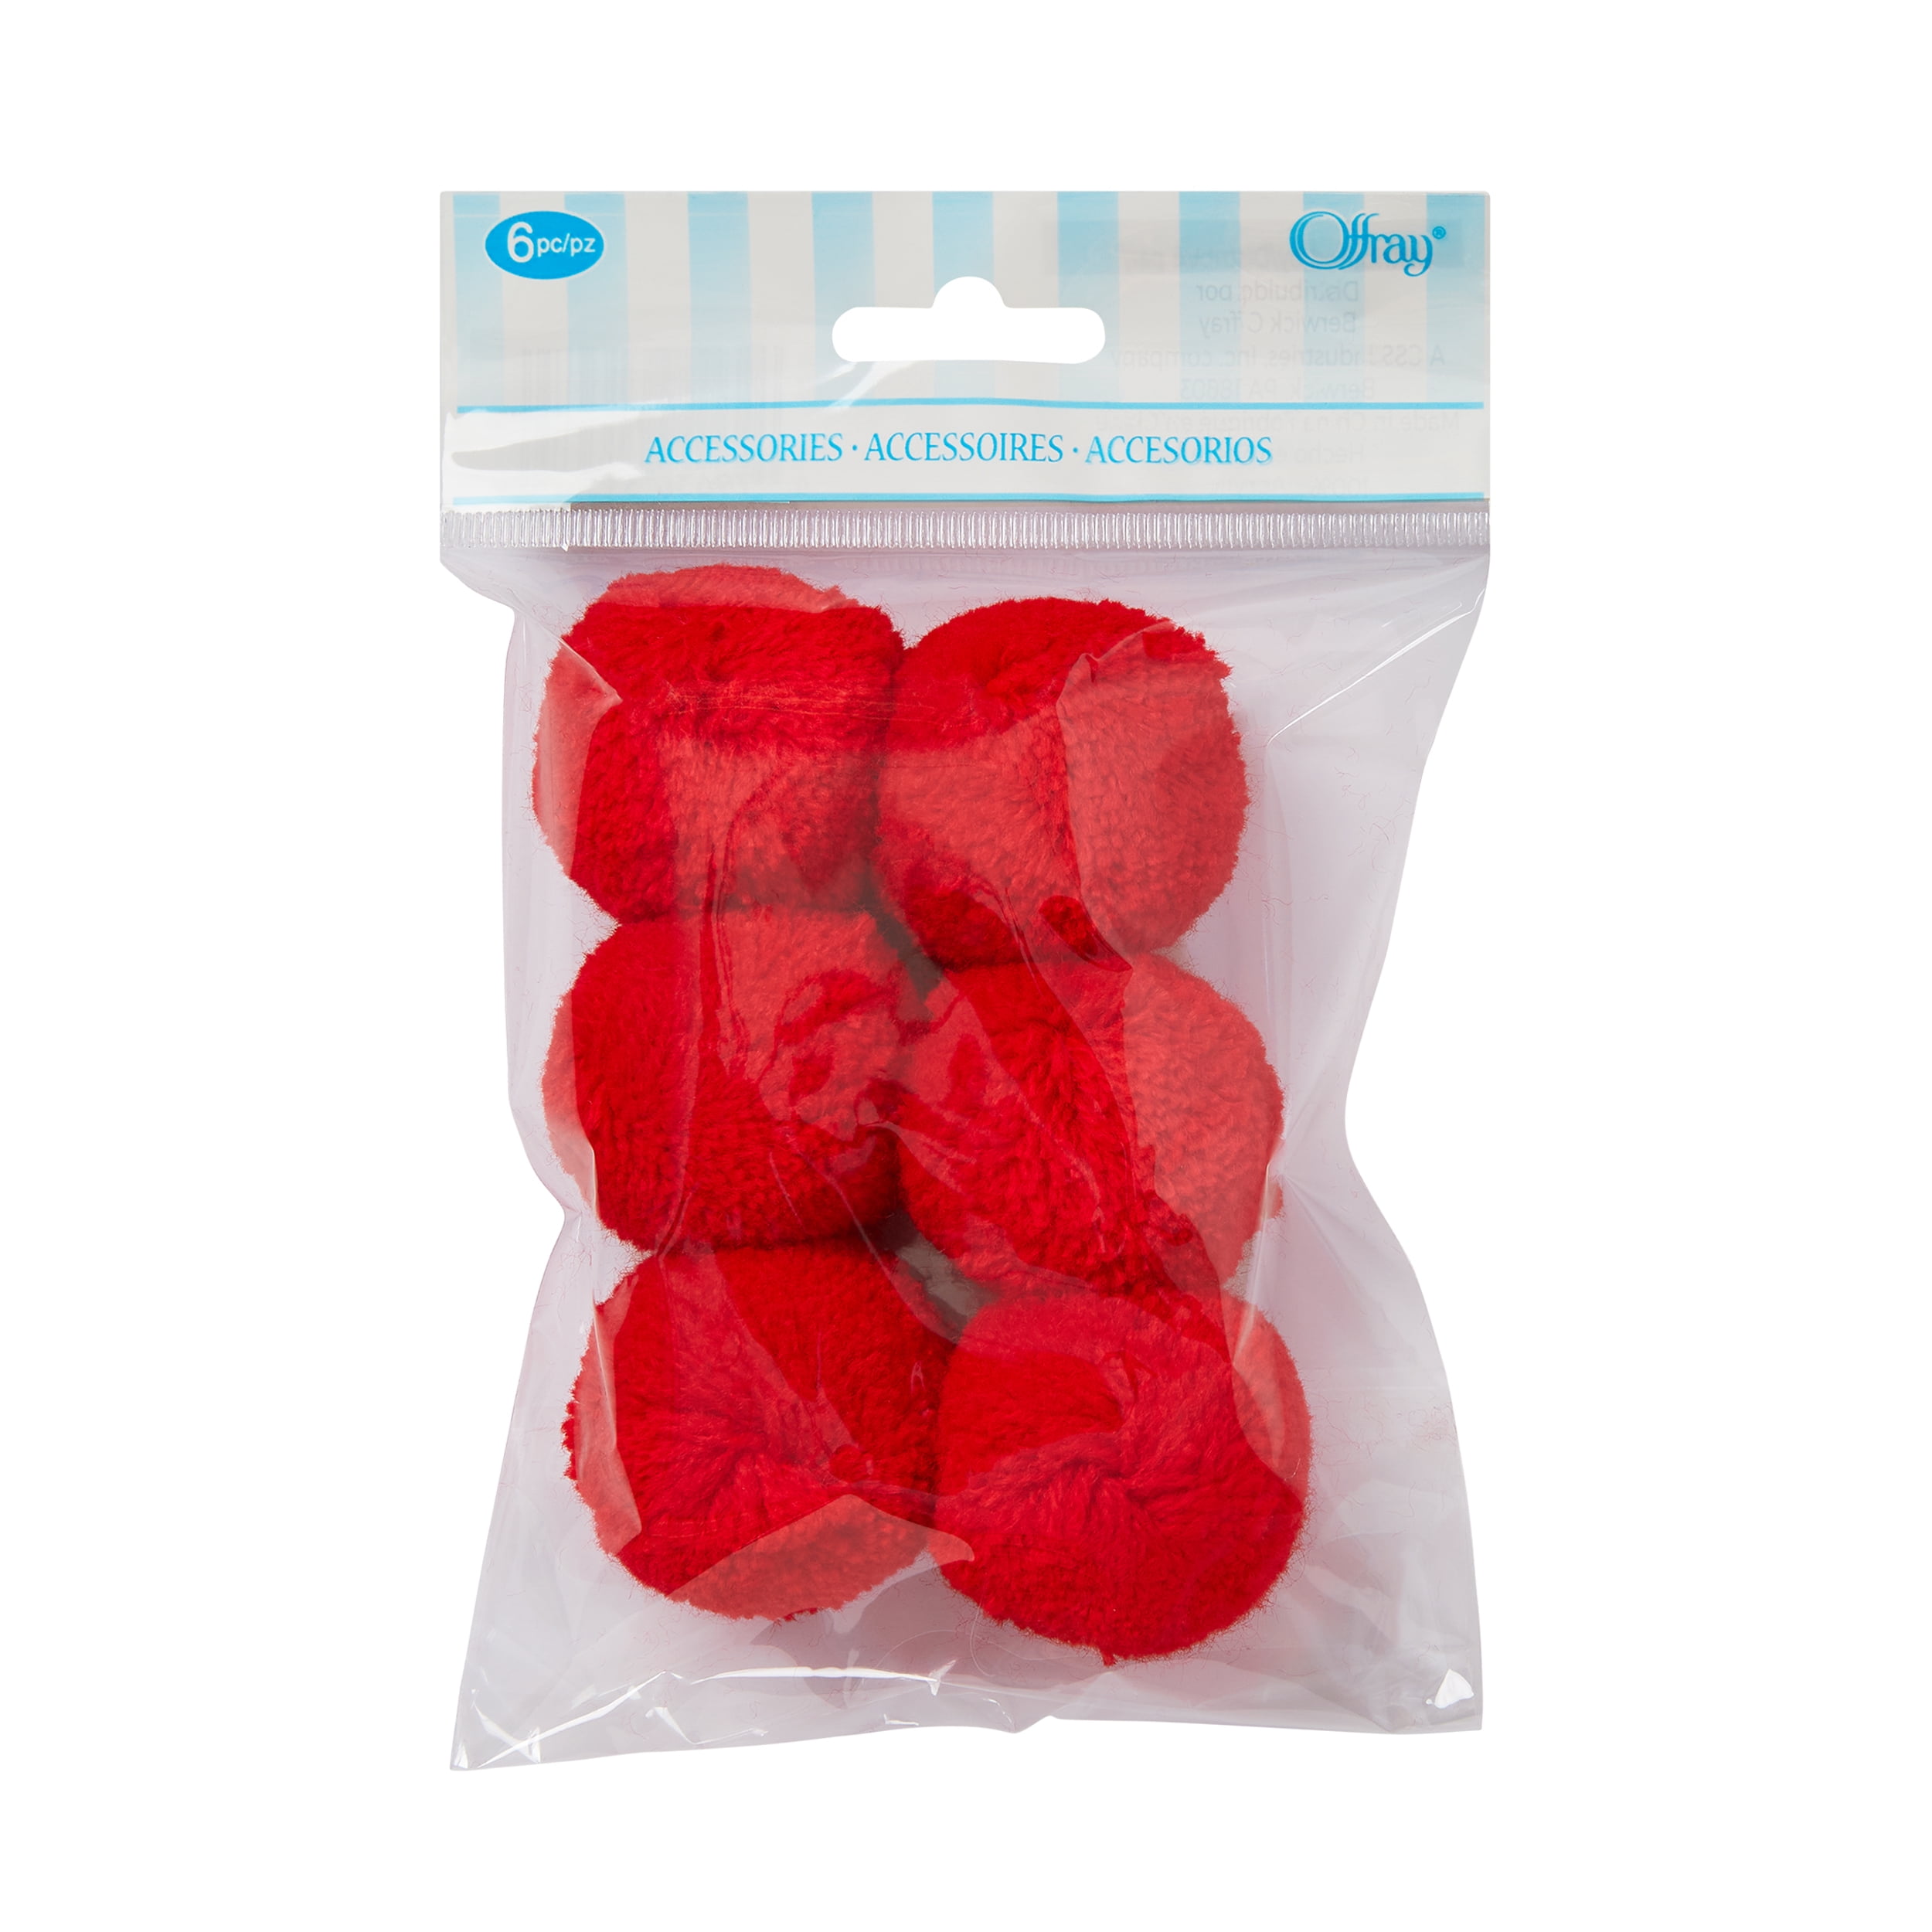 Creatology - Mini Red Pom-poms - 65 pc - Crown Office Supplies